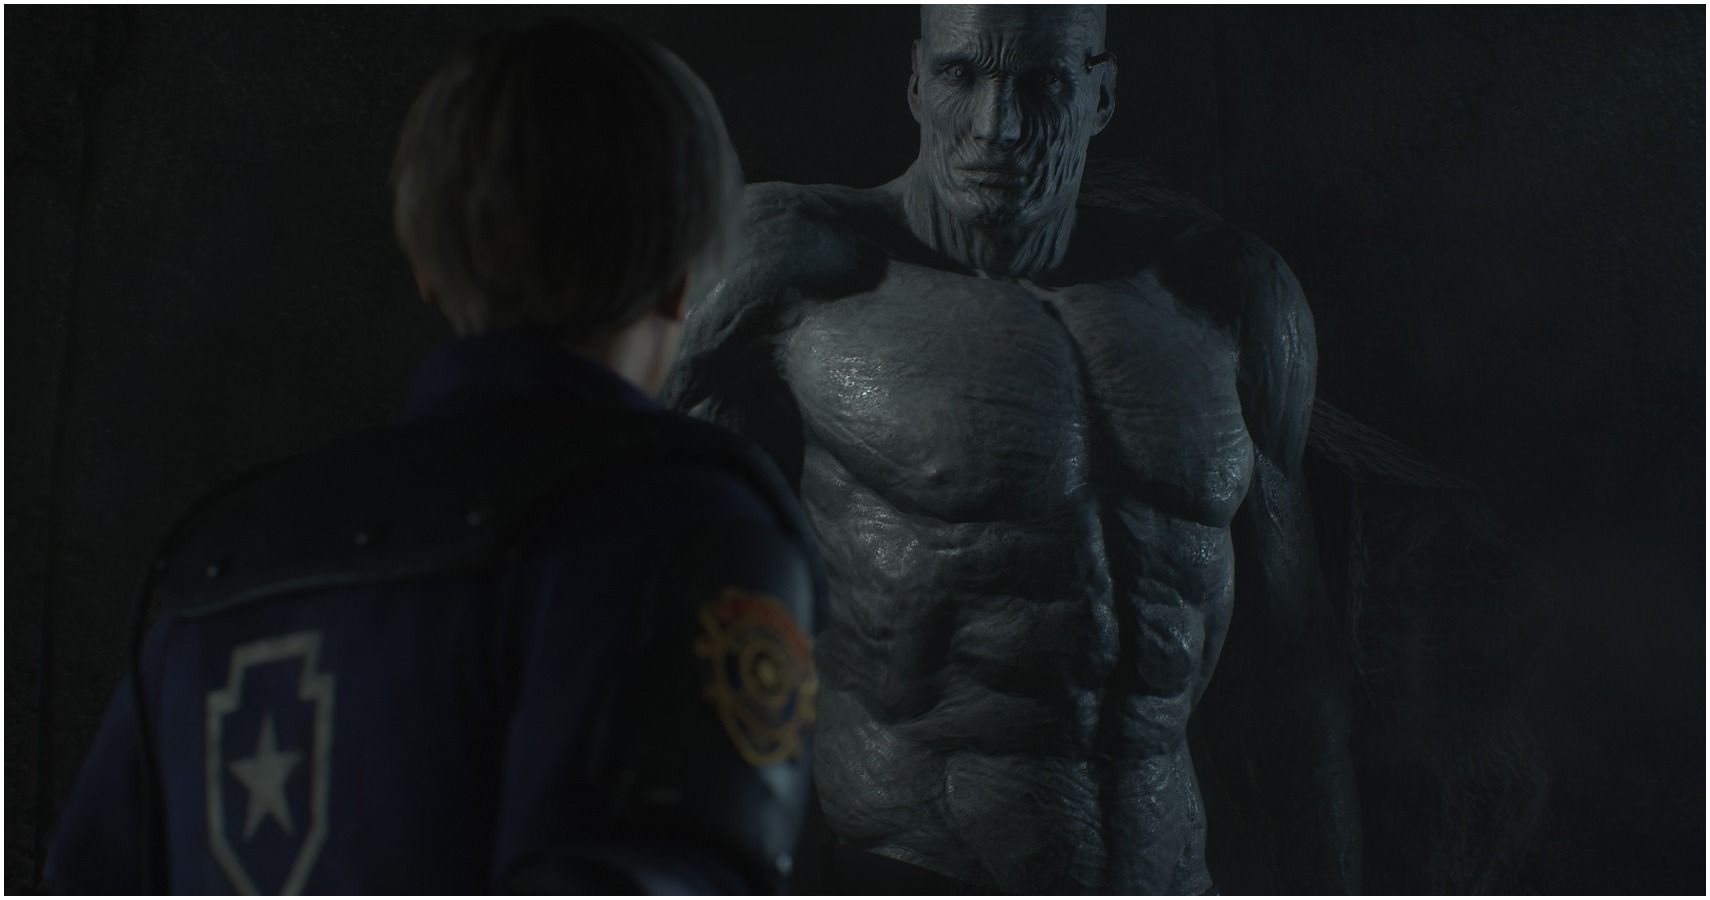 Resident Evil 2 Now Has Mod That Puts Mr. X In A Speedo, Gives Him a  Rockin' Bod